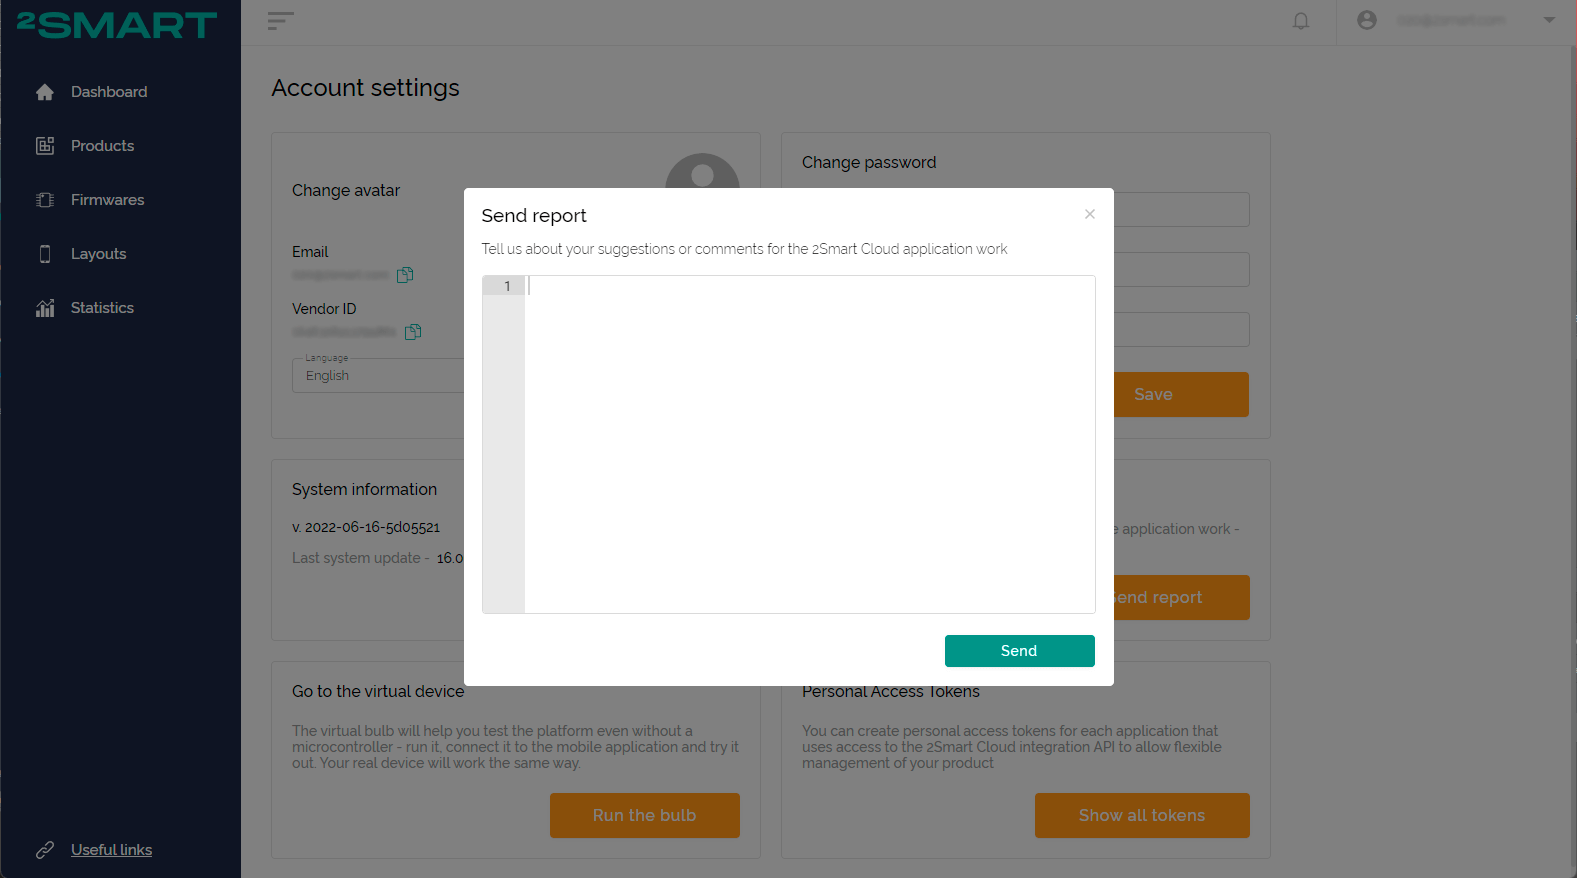 The Account settings section